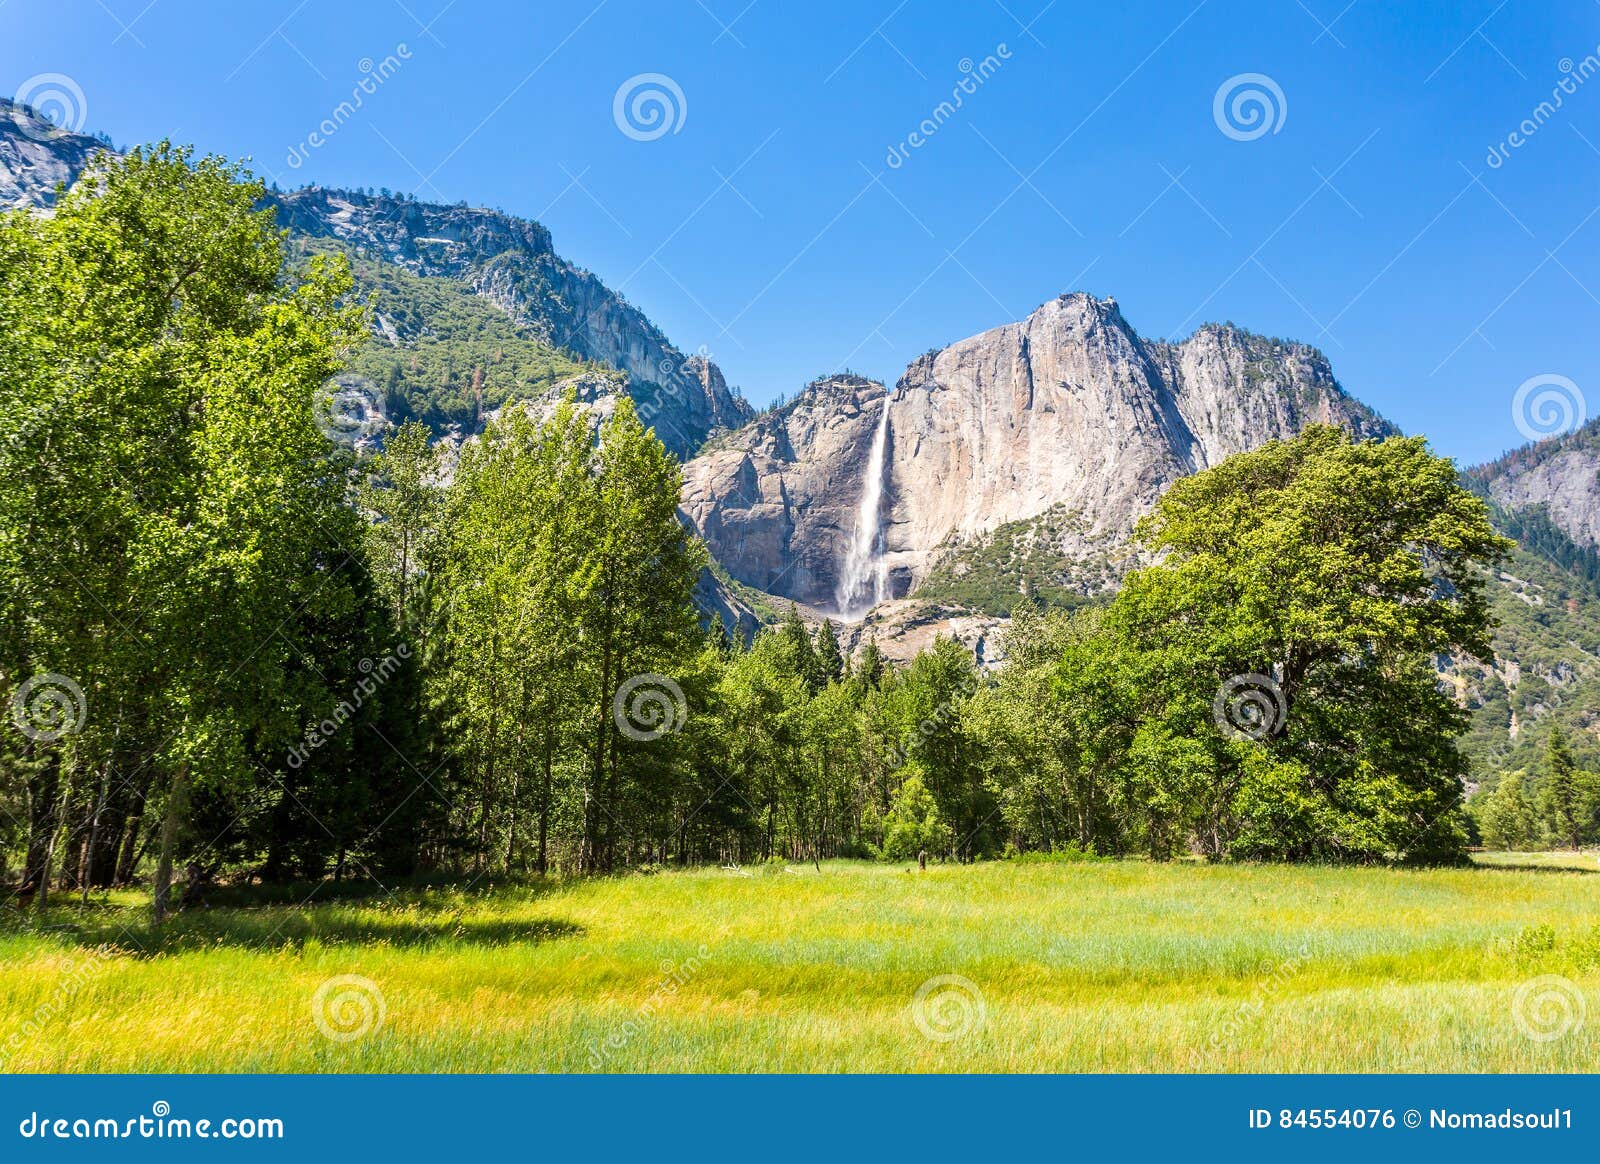 Meadow And Trees Surrounded By Rocky Mountains Stock Photo ...